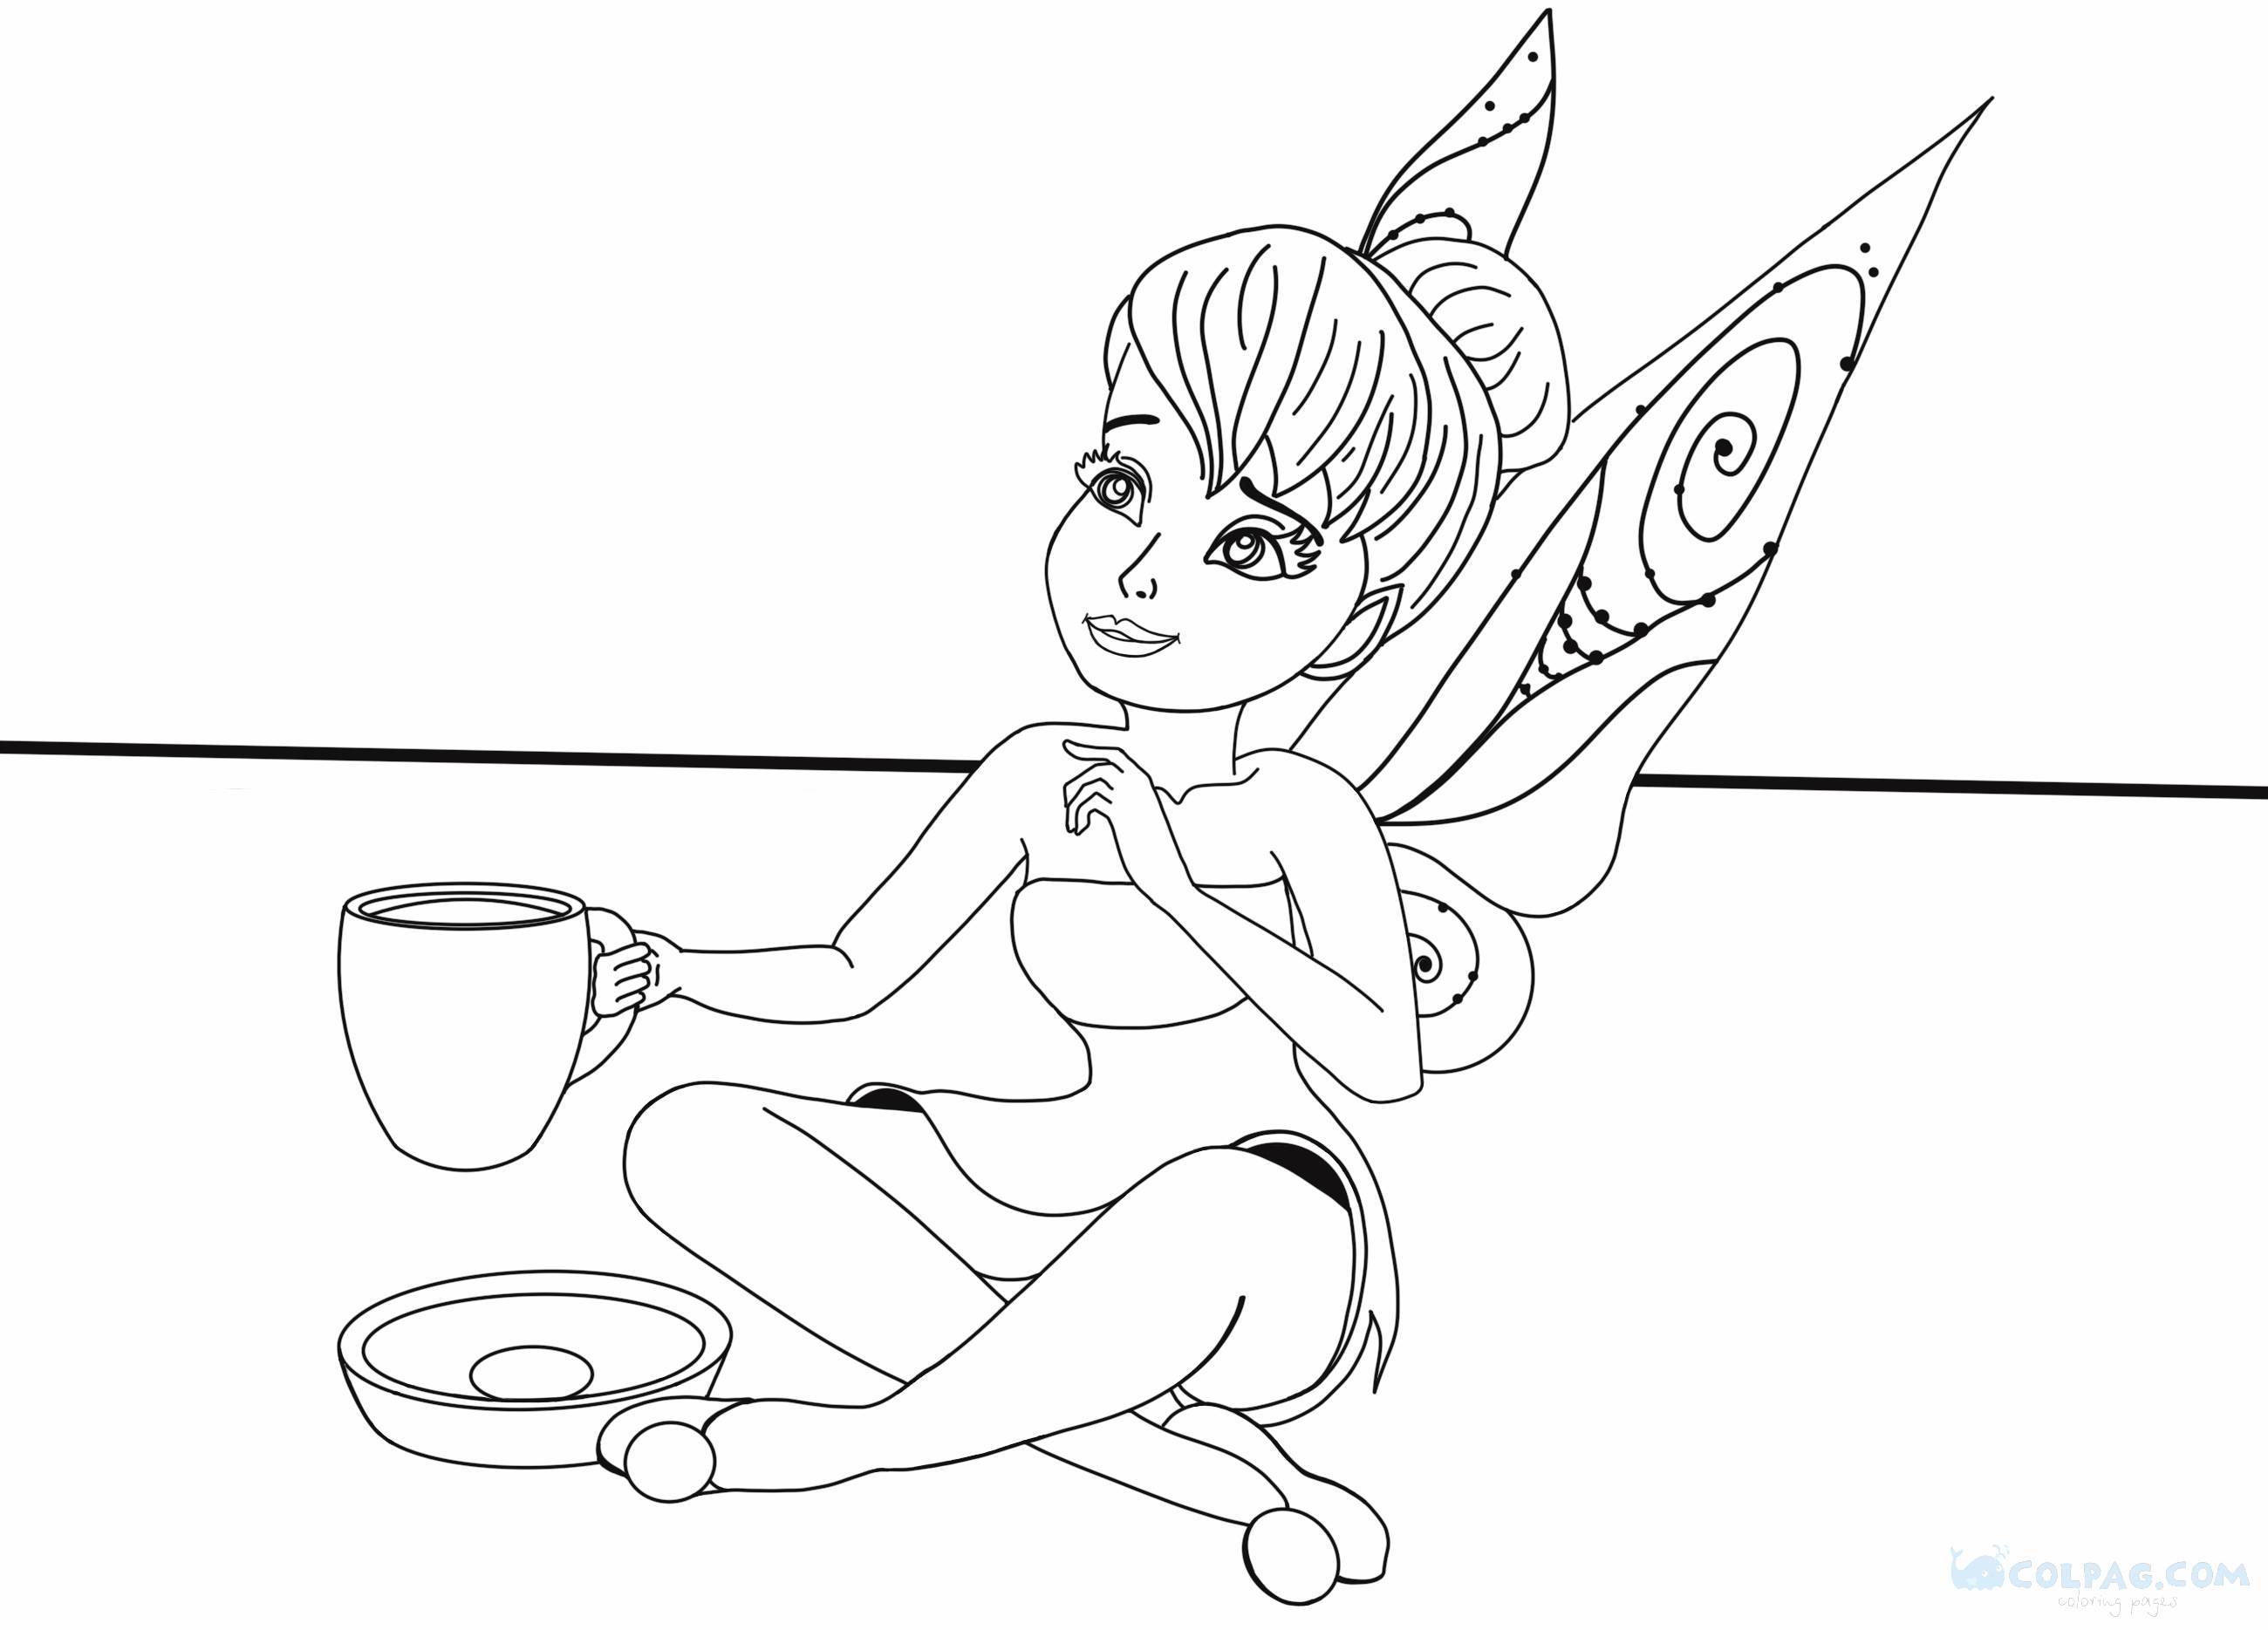 tinkerbell-coloring-page-colpag-com-9